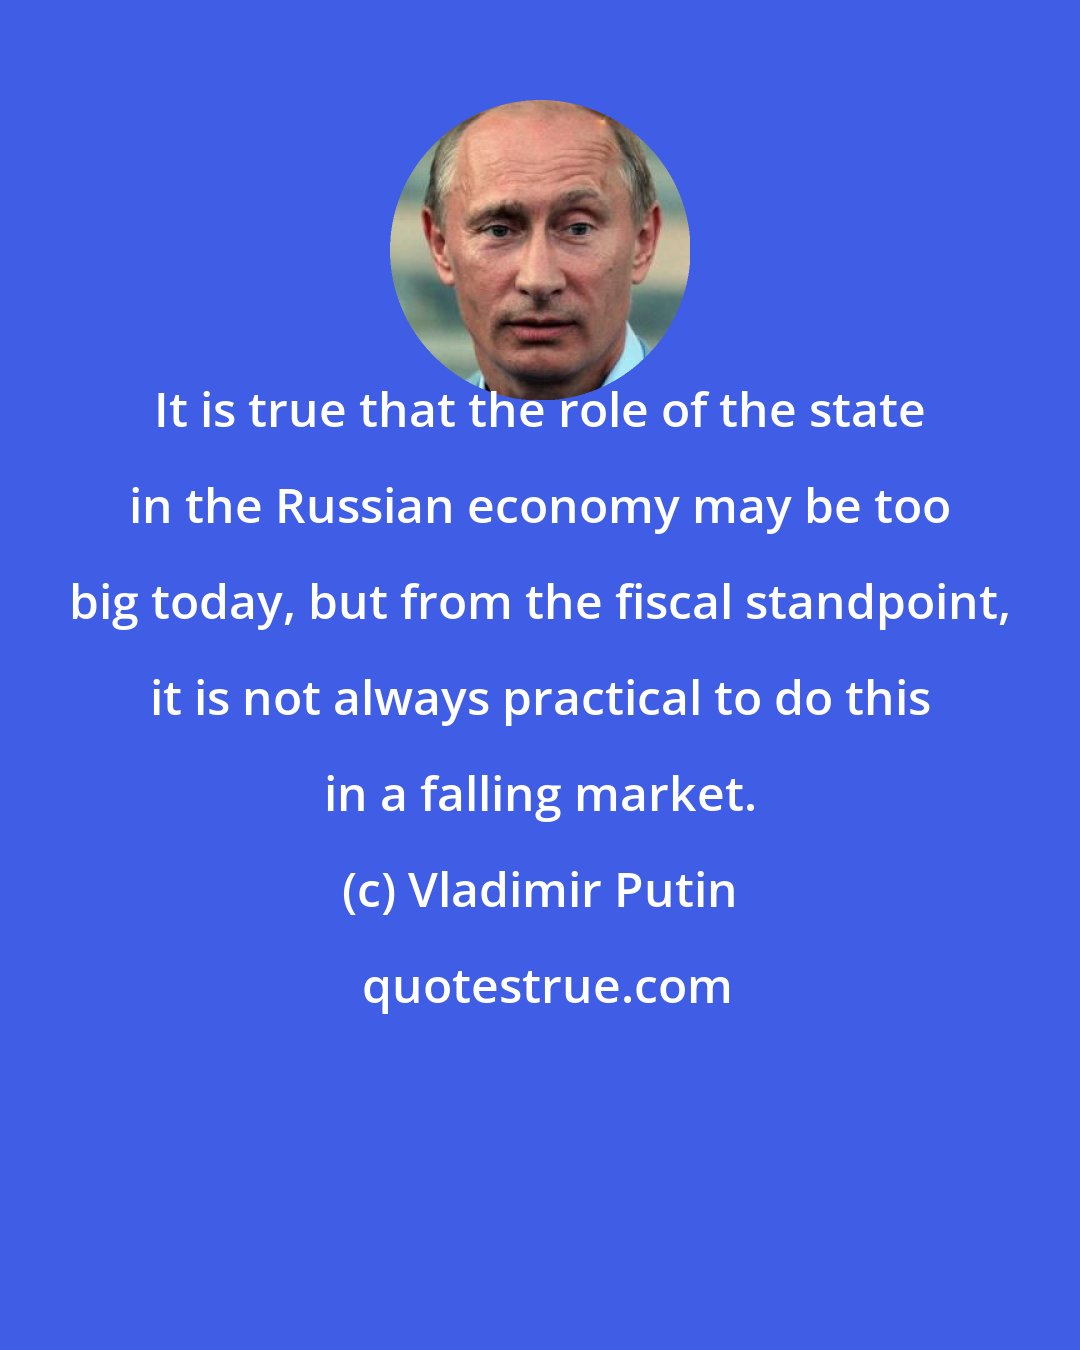 Vladimir Putin: It is true that the role of the state in the Russian economy may be too big today, but from the fiscal standpoint, it is not always practical to do this in a falling market.